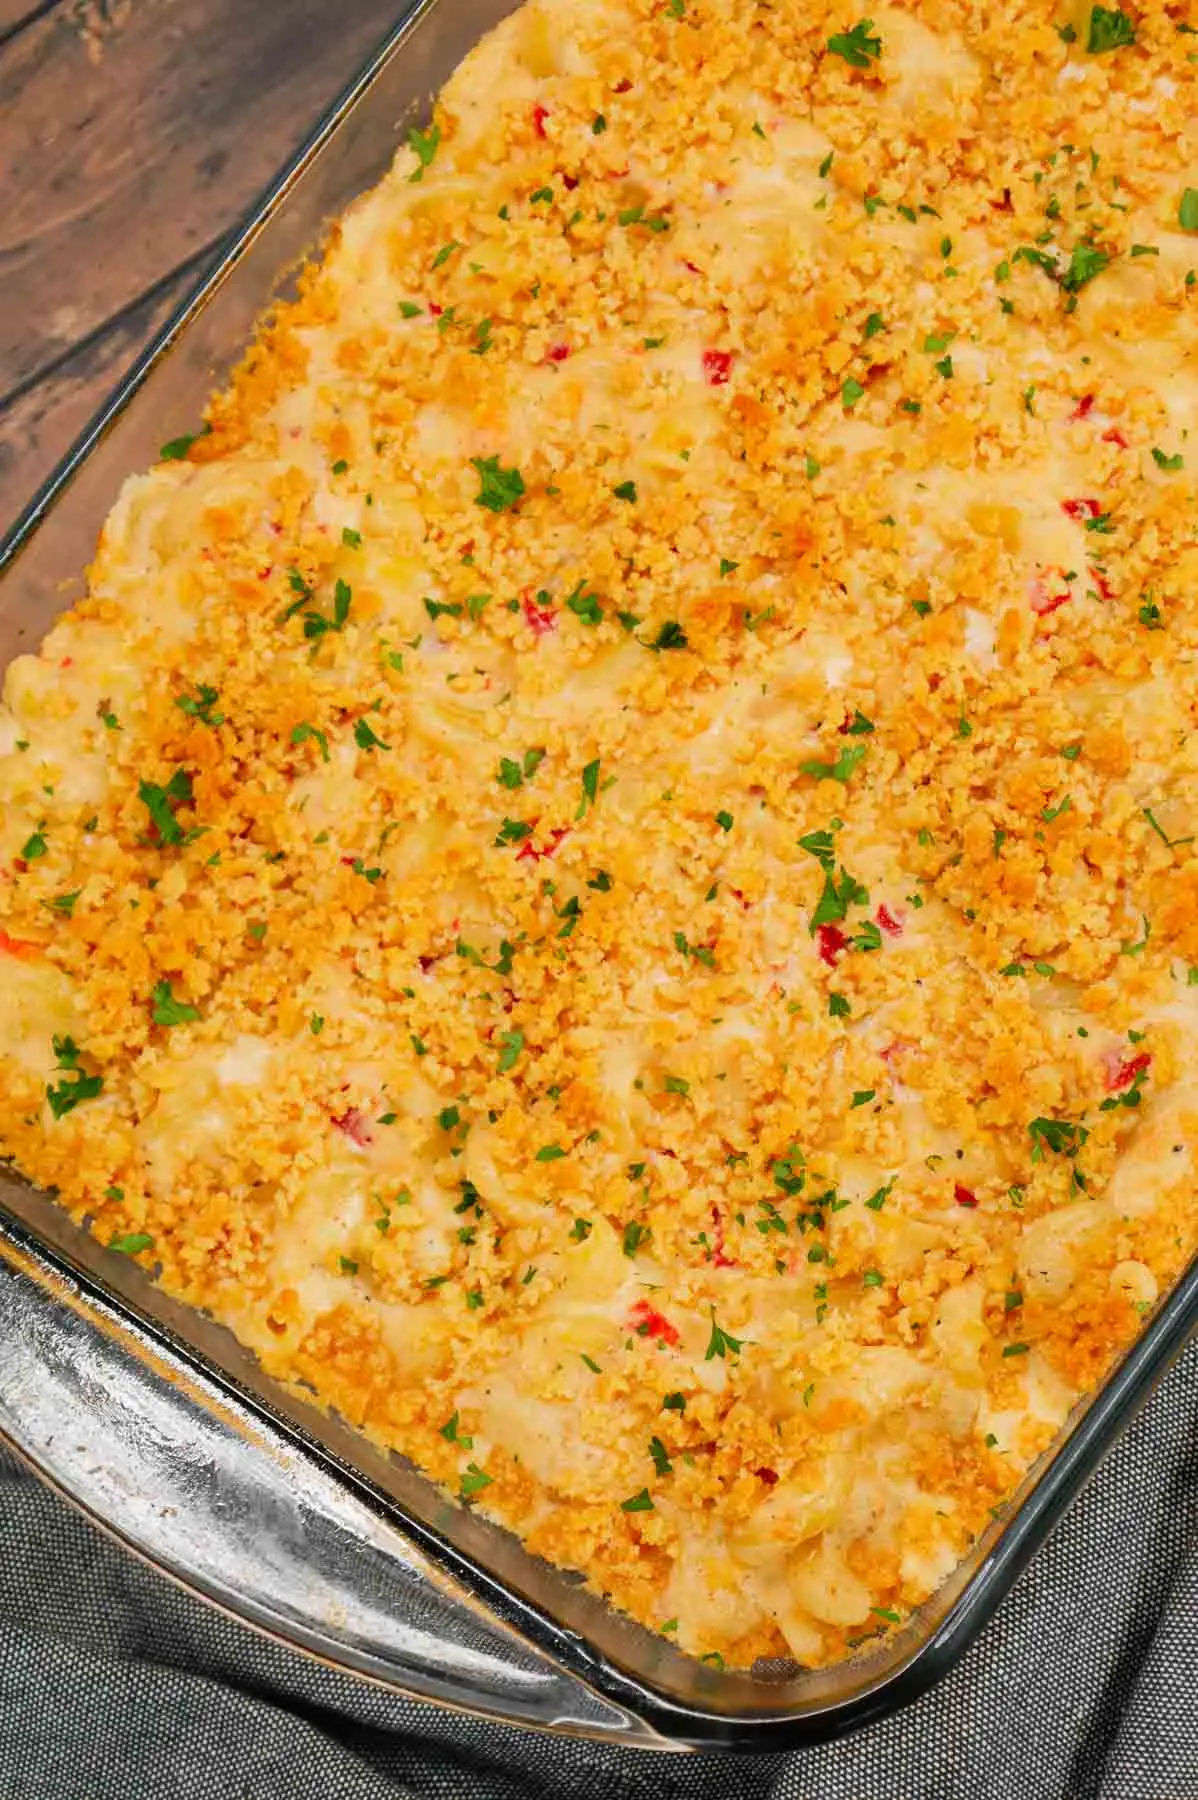 Pimento Mac and Cheese is a delicious creamy pasta recipe loaded with white cheddar, cream cheese and diced pimentos and baked with a buttery Ritz cracker topping.